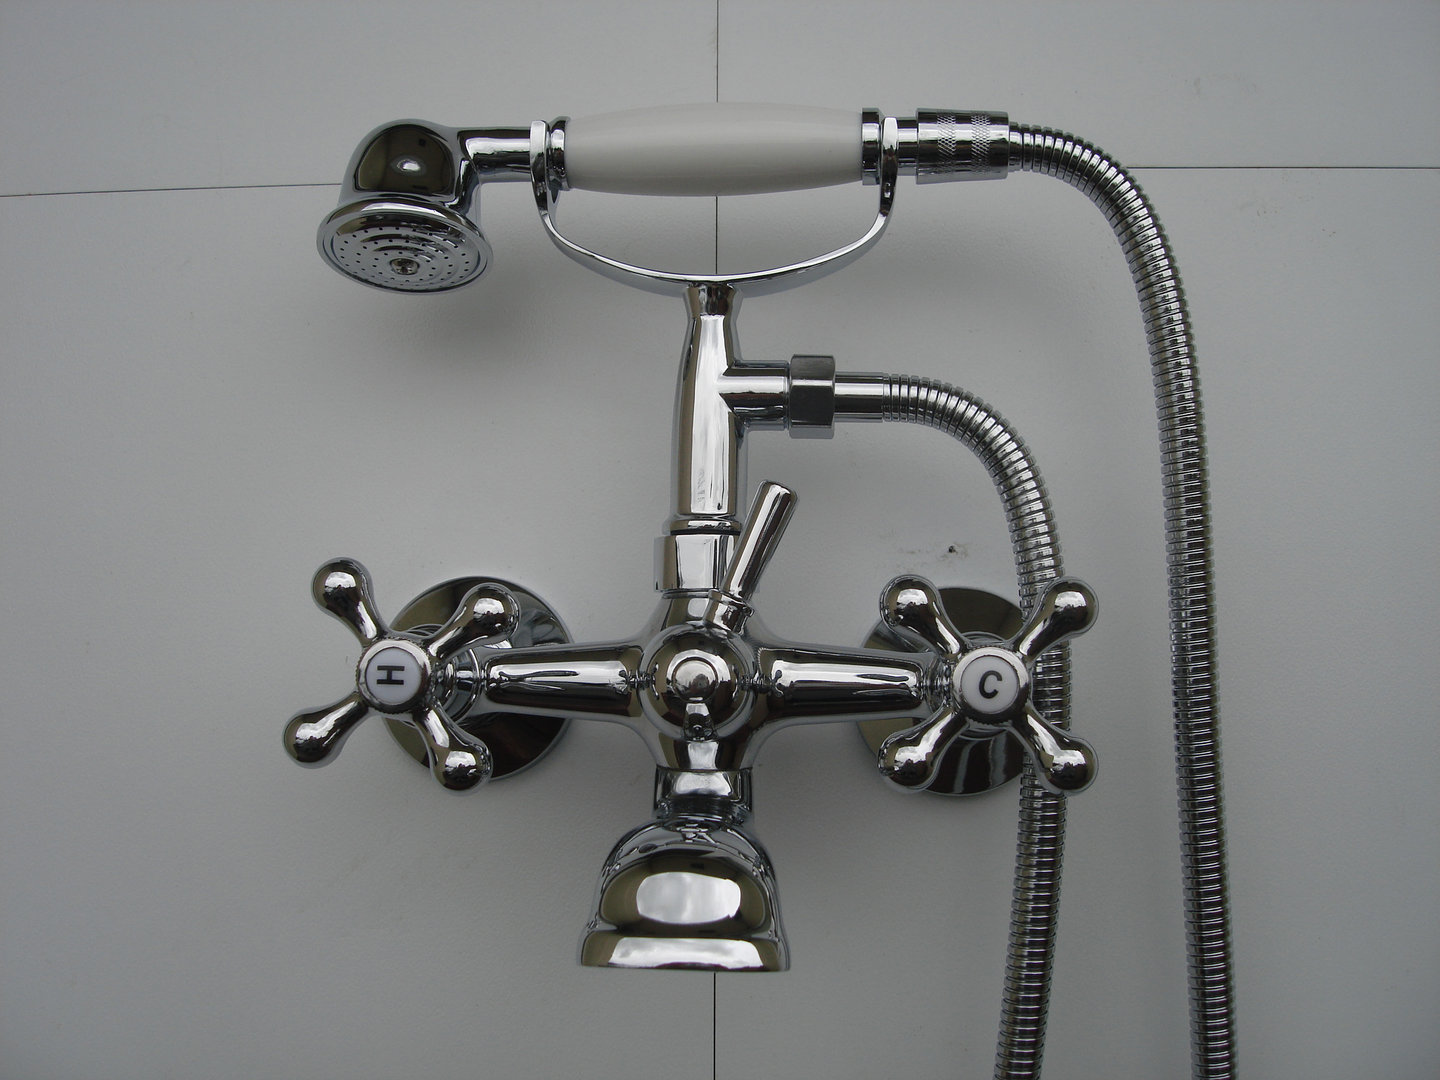 OurTaps 019N3 Traditional Victorian Style Low Pressure Bath Shower Mixer Taps Cross Handles Telephone Cradle 